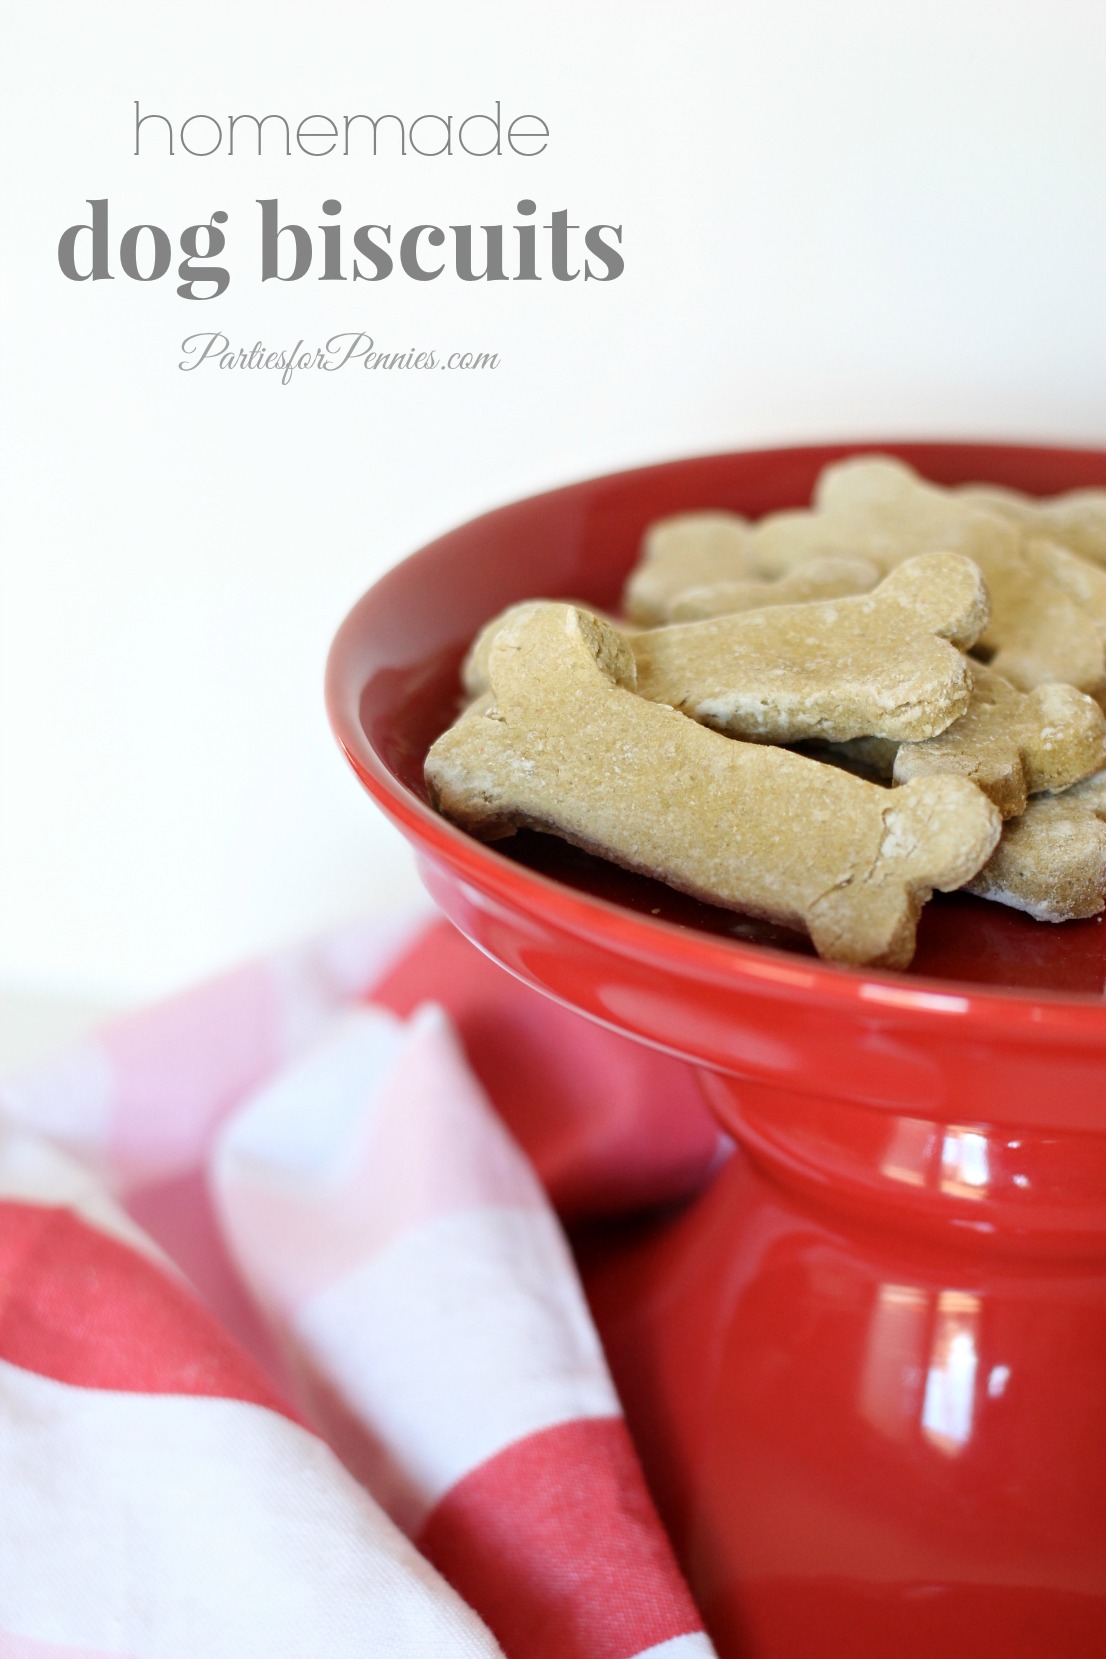 Homemade Dog Biscuits - PartiesforPennies.com